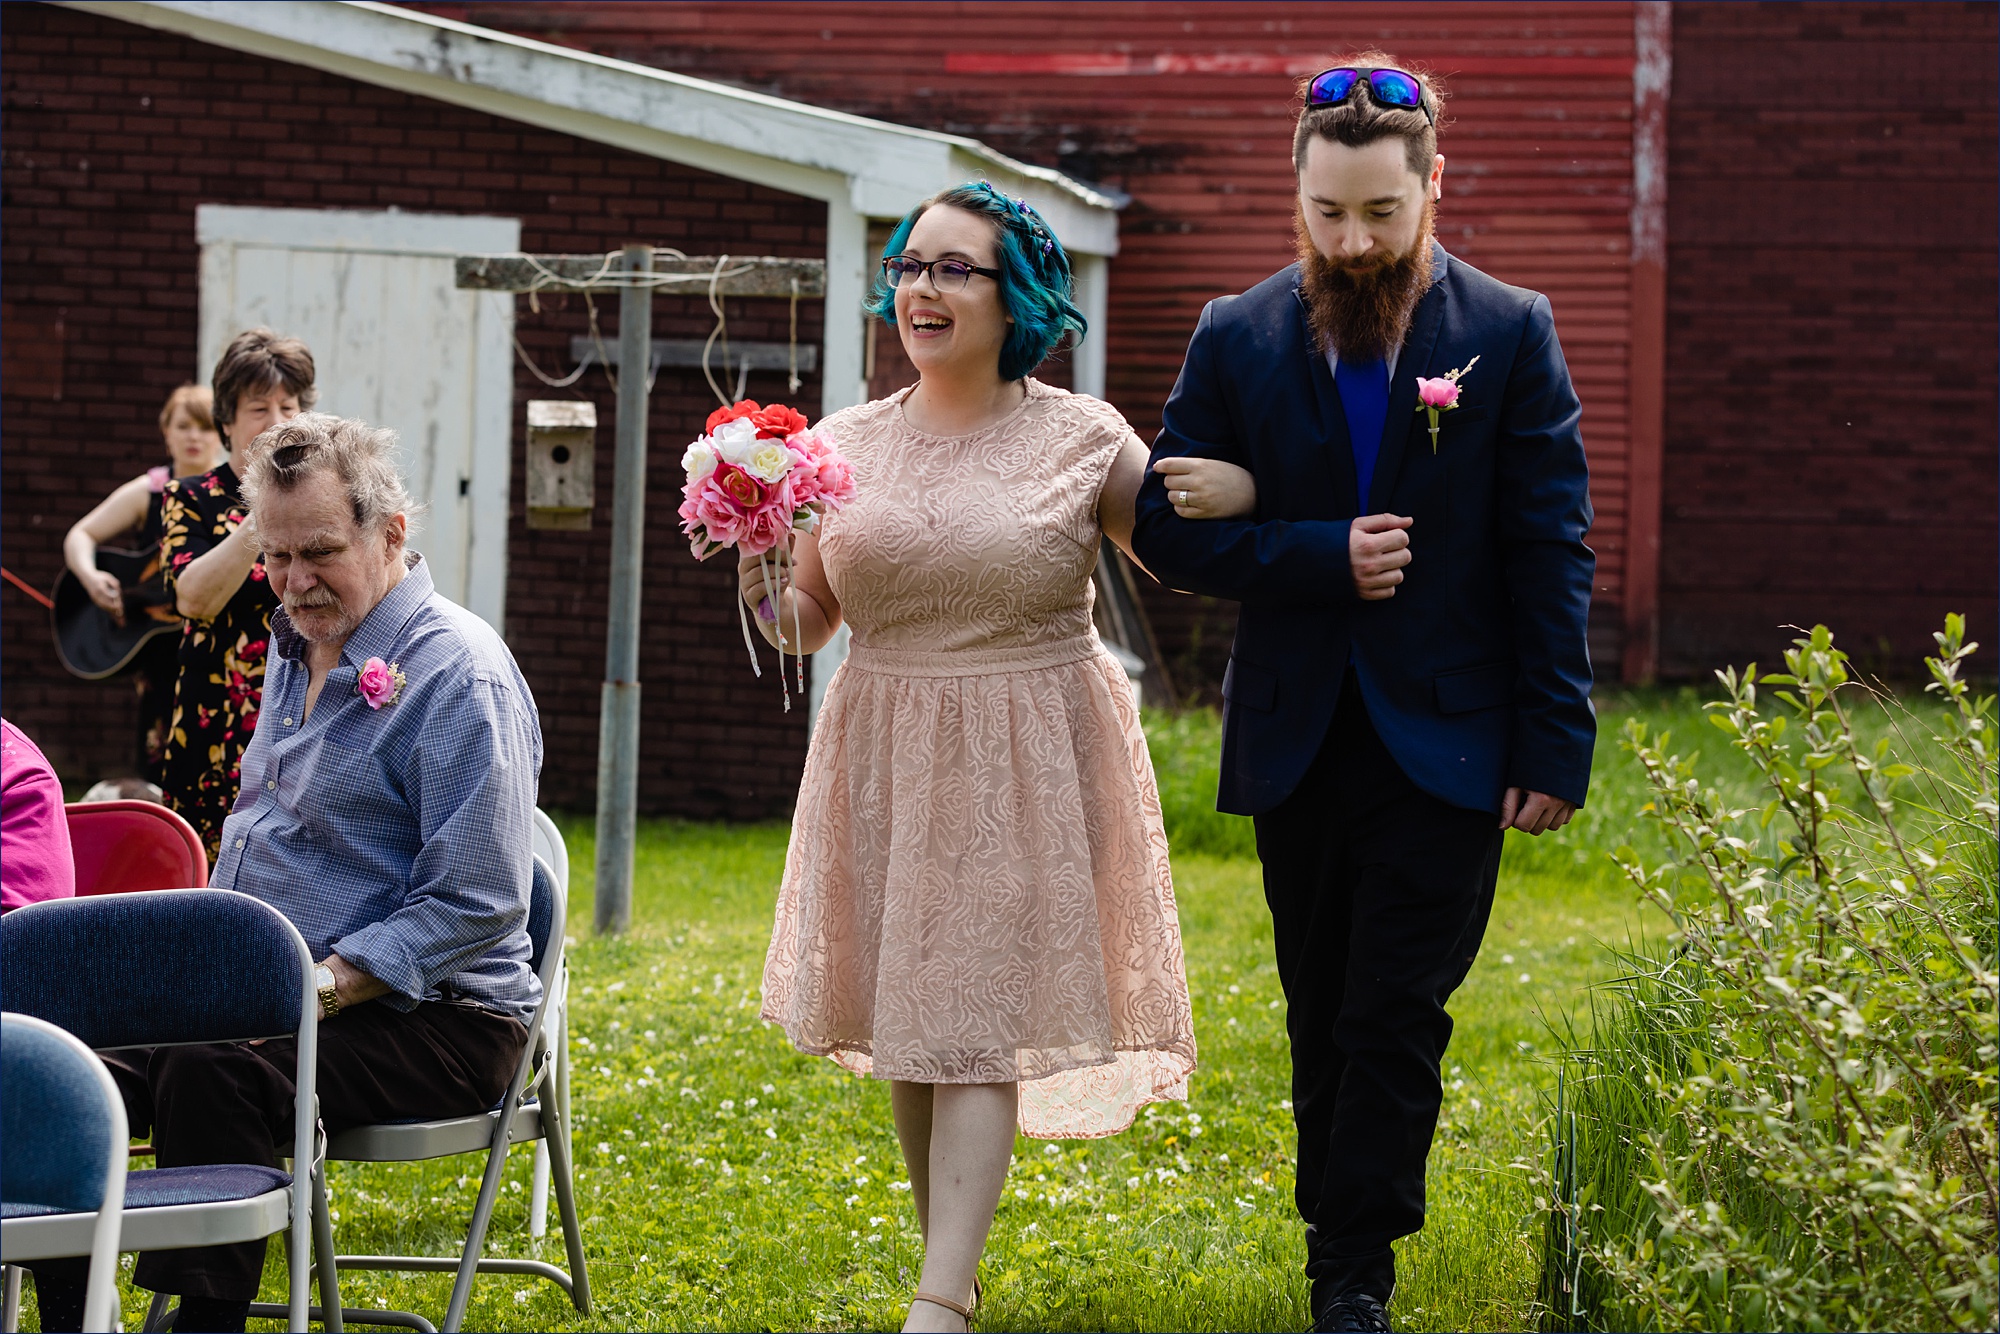 The bride's brother escorts her into the outdoor Maine intimate wedding ceremony